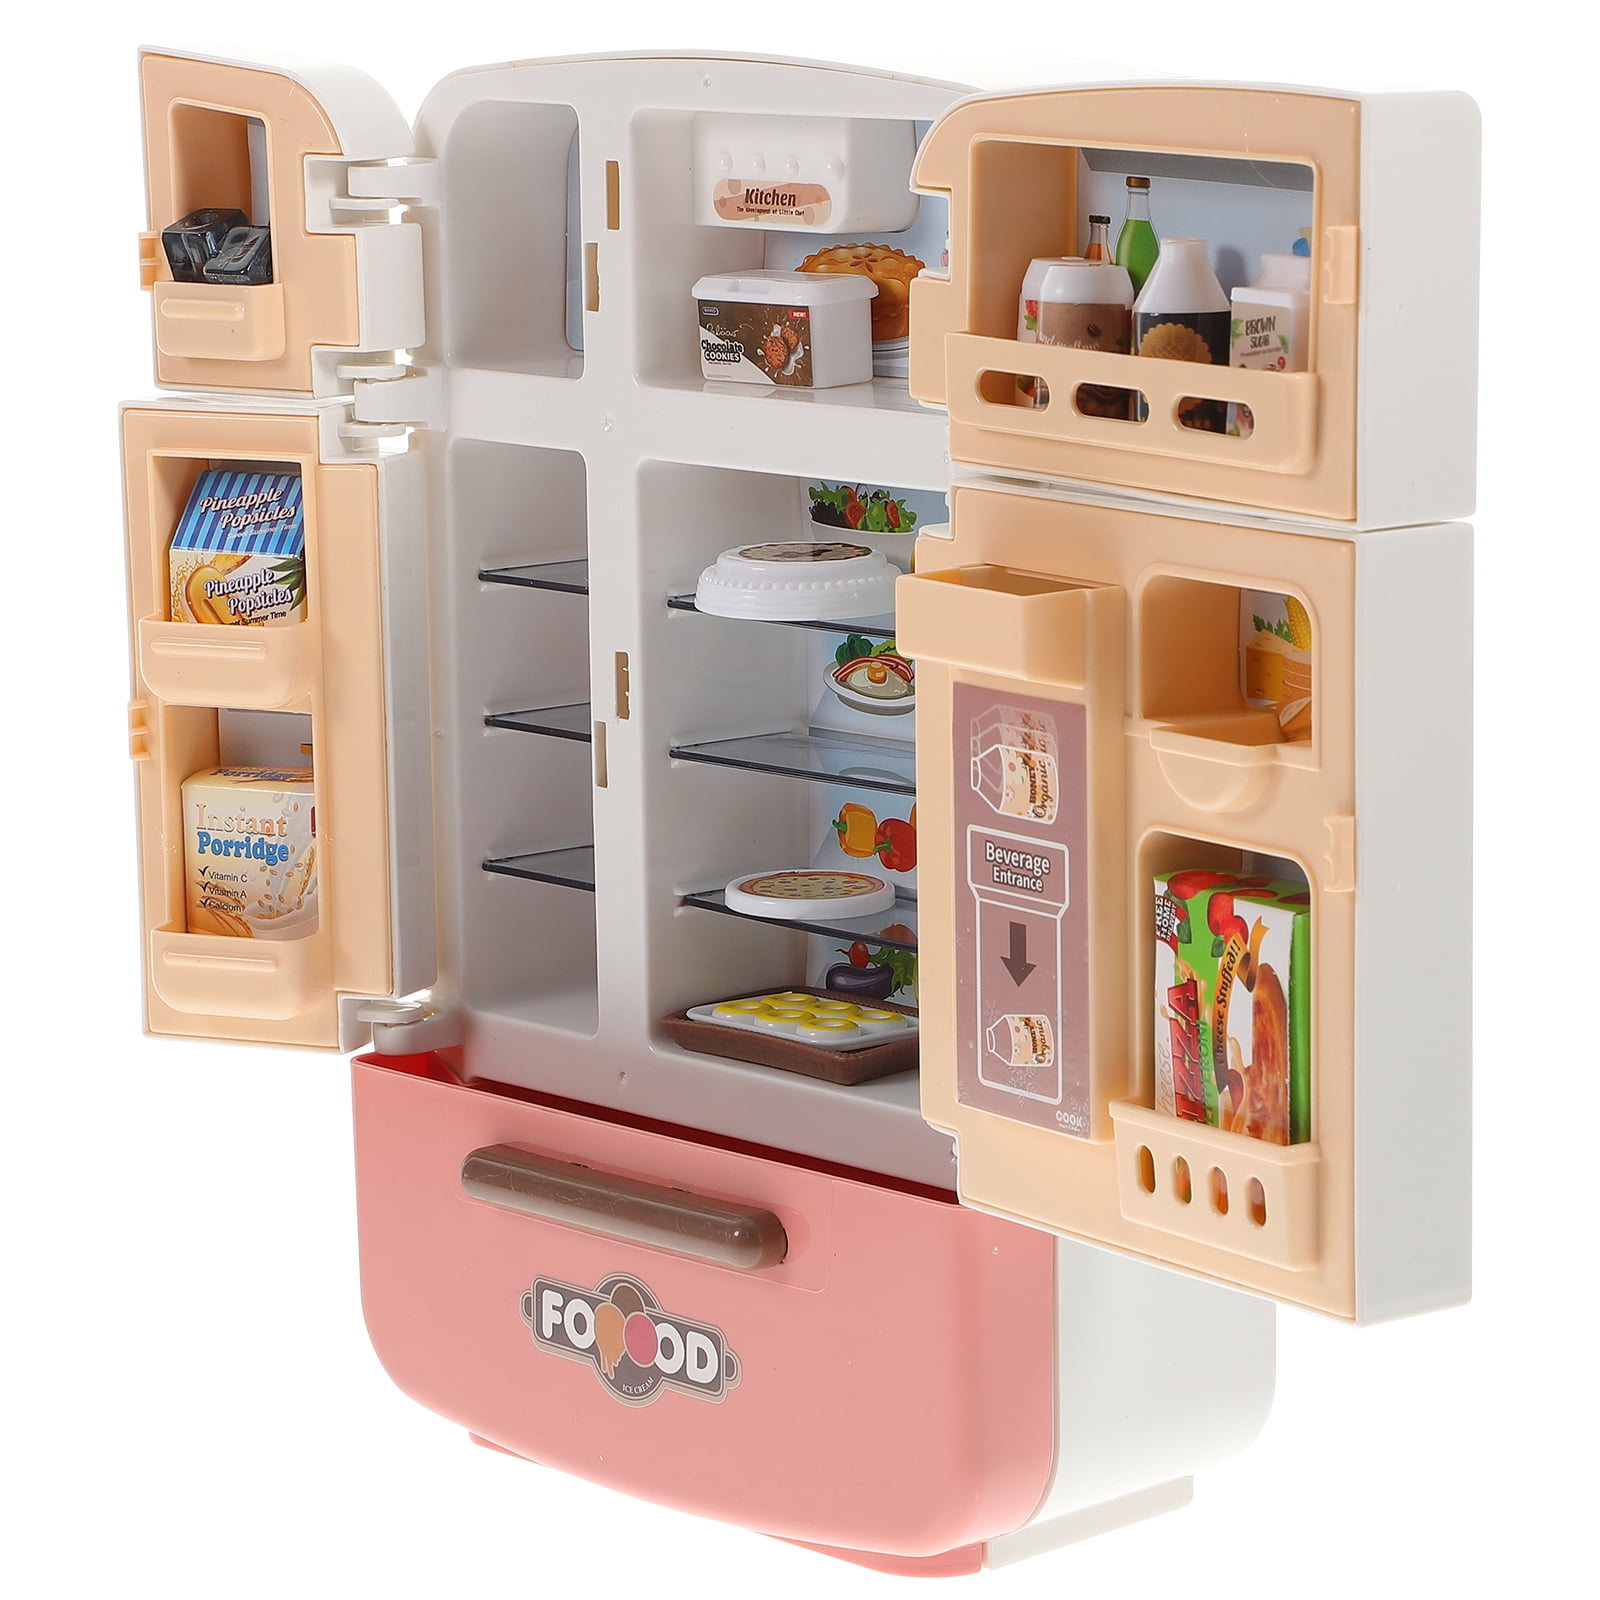 Pretend Play Simulation Kitchen Toy Mini Fridge Furniture Refrigerator  Accessories Cook Food Play House Toys For Girls Children